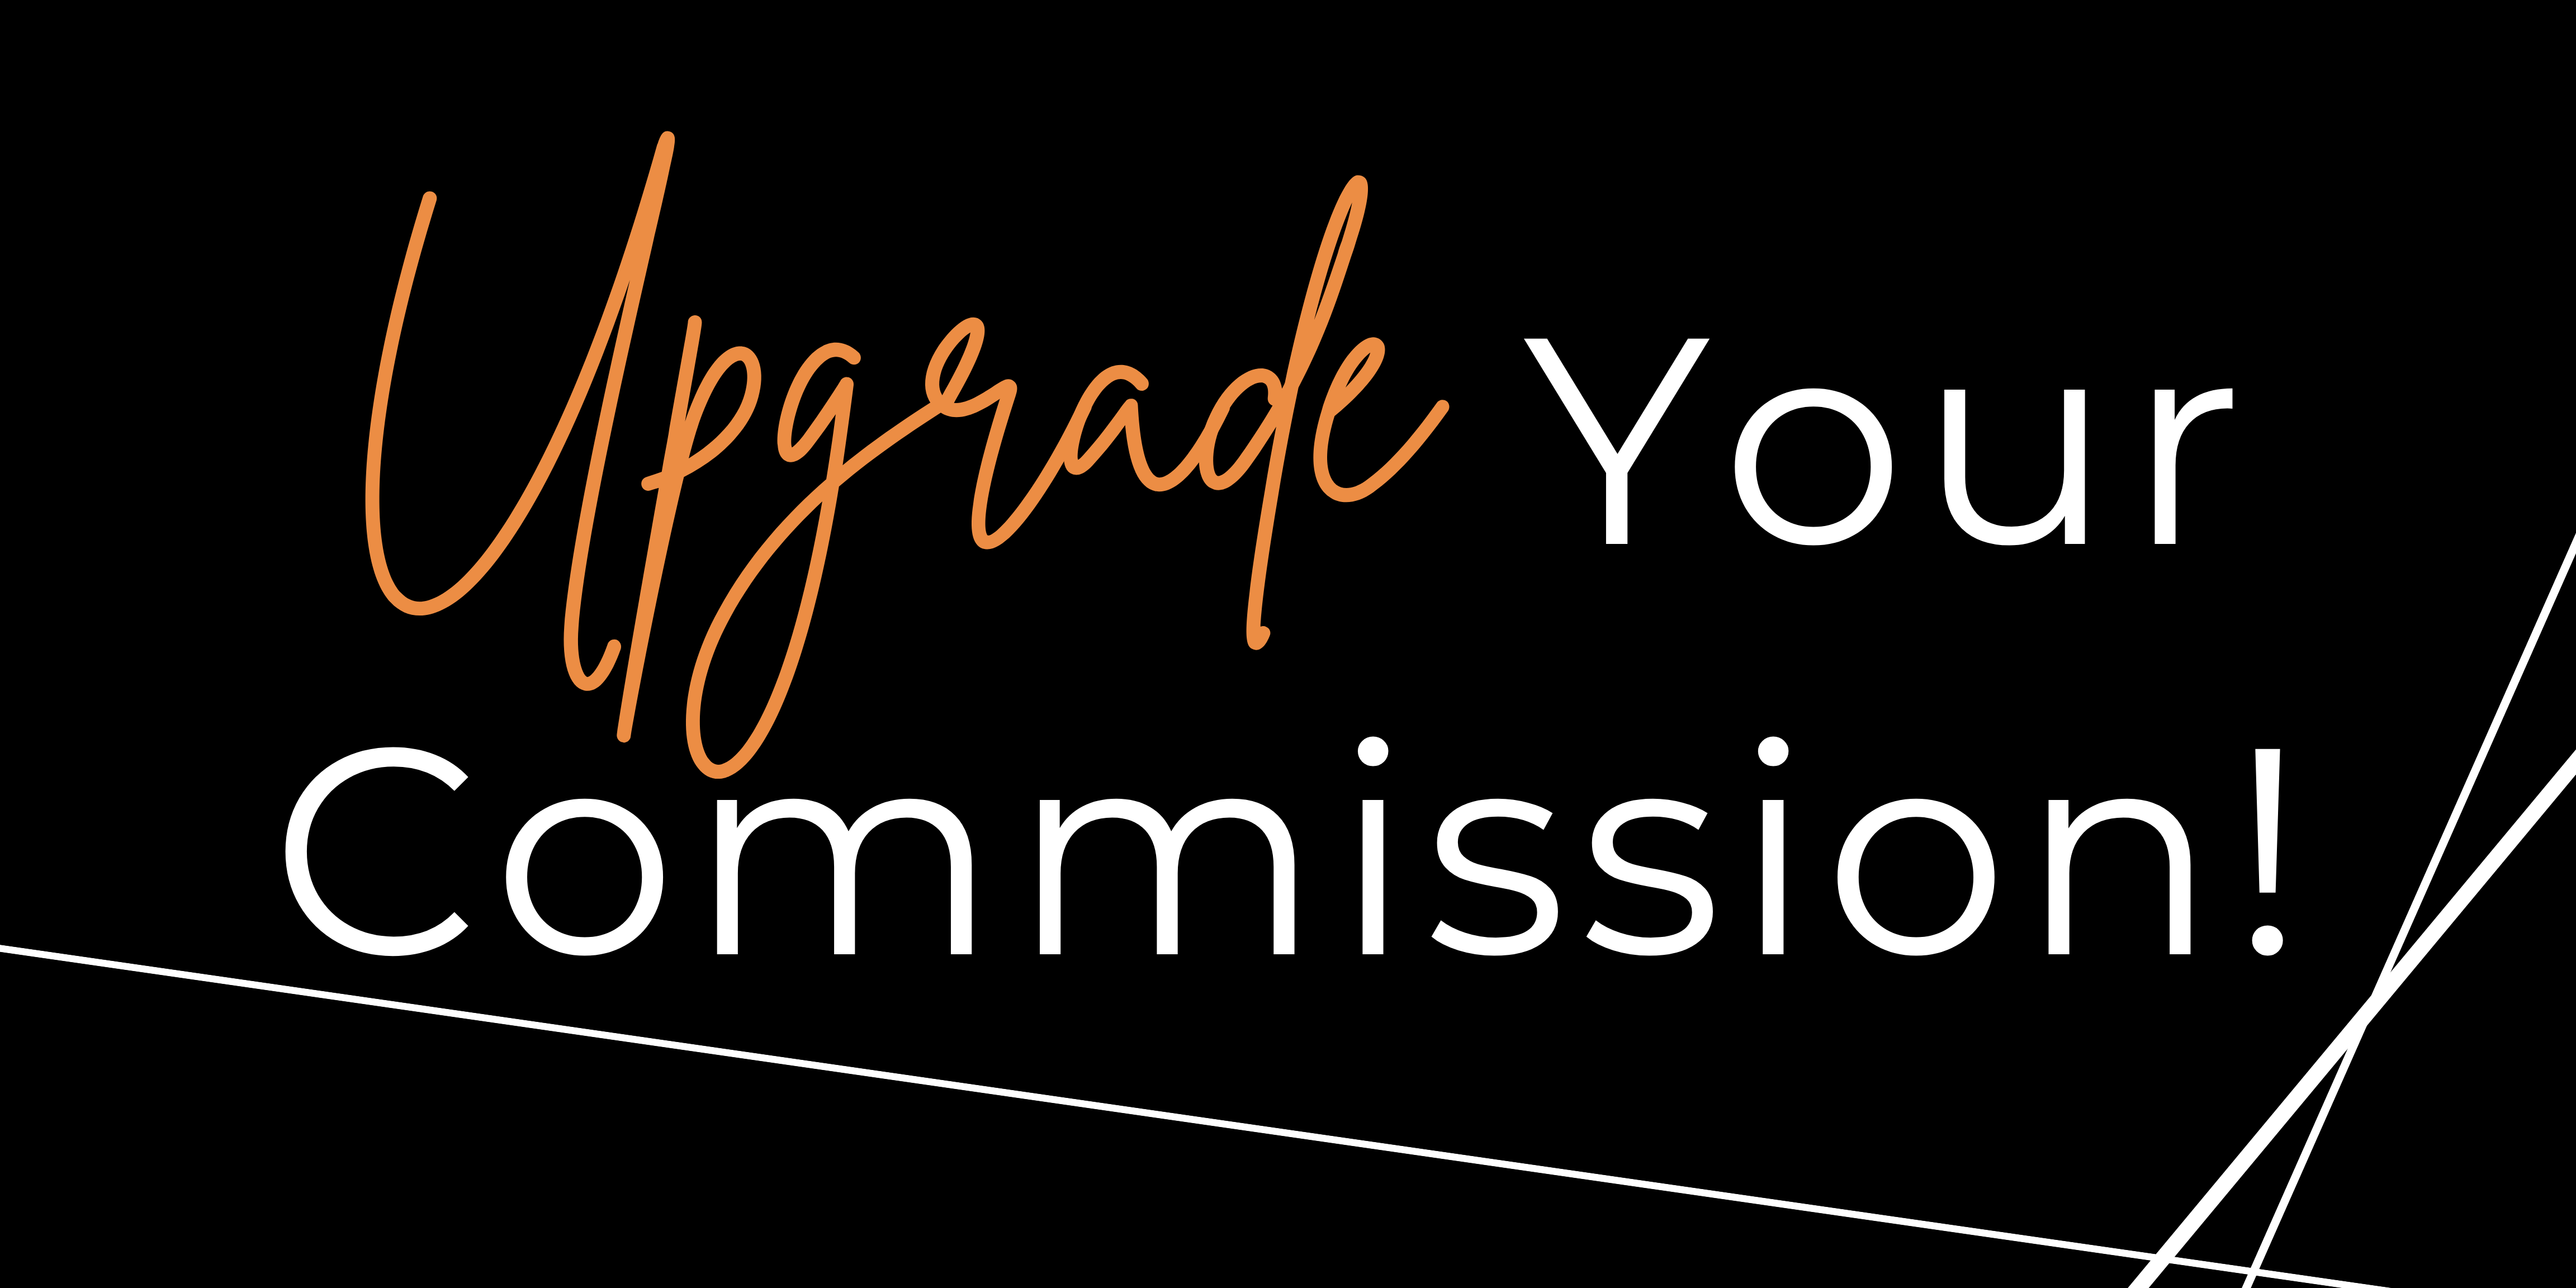 Upgrade Your Commission